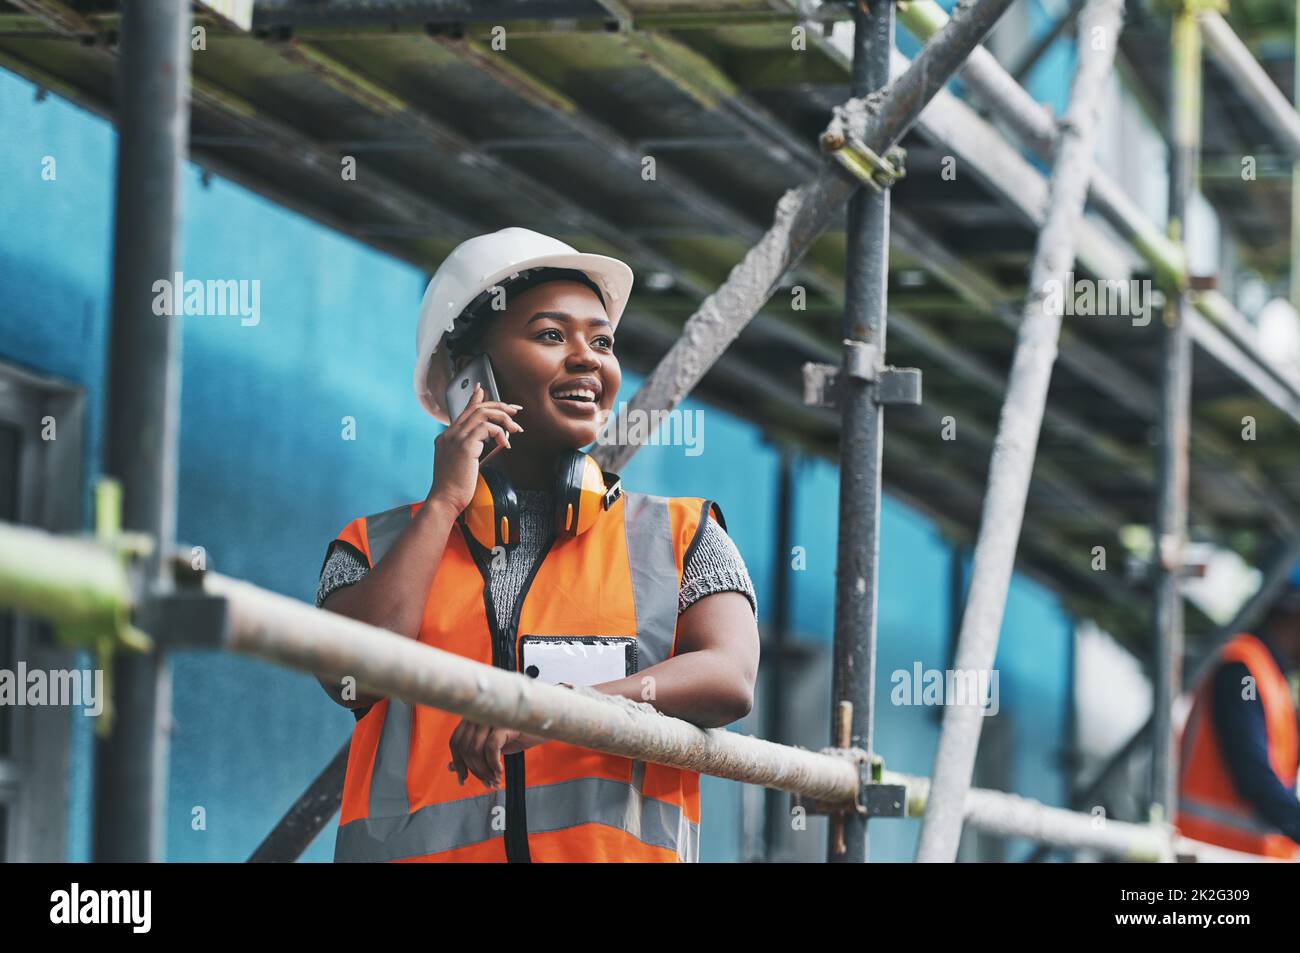 Monitoring the conception and execution of a new build. Shot of a young woman talking on a cellphone while working at a construction site. Stock Photo